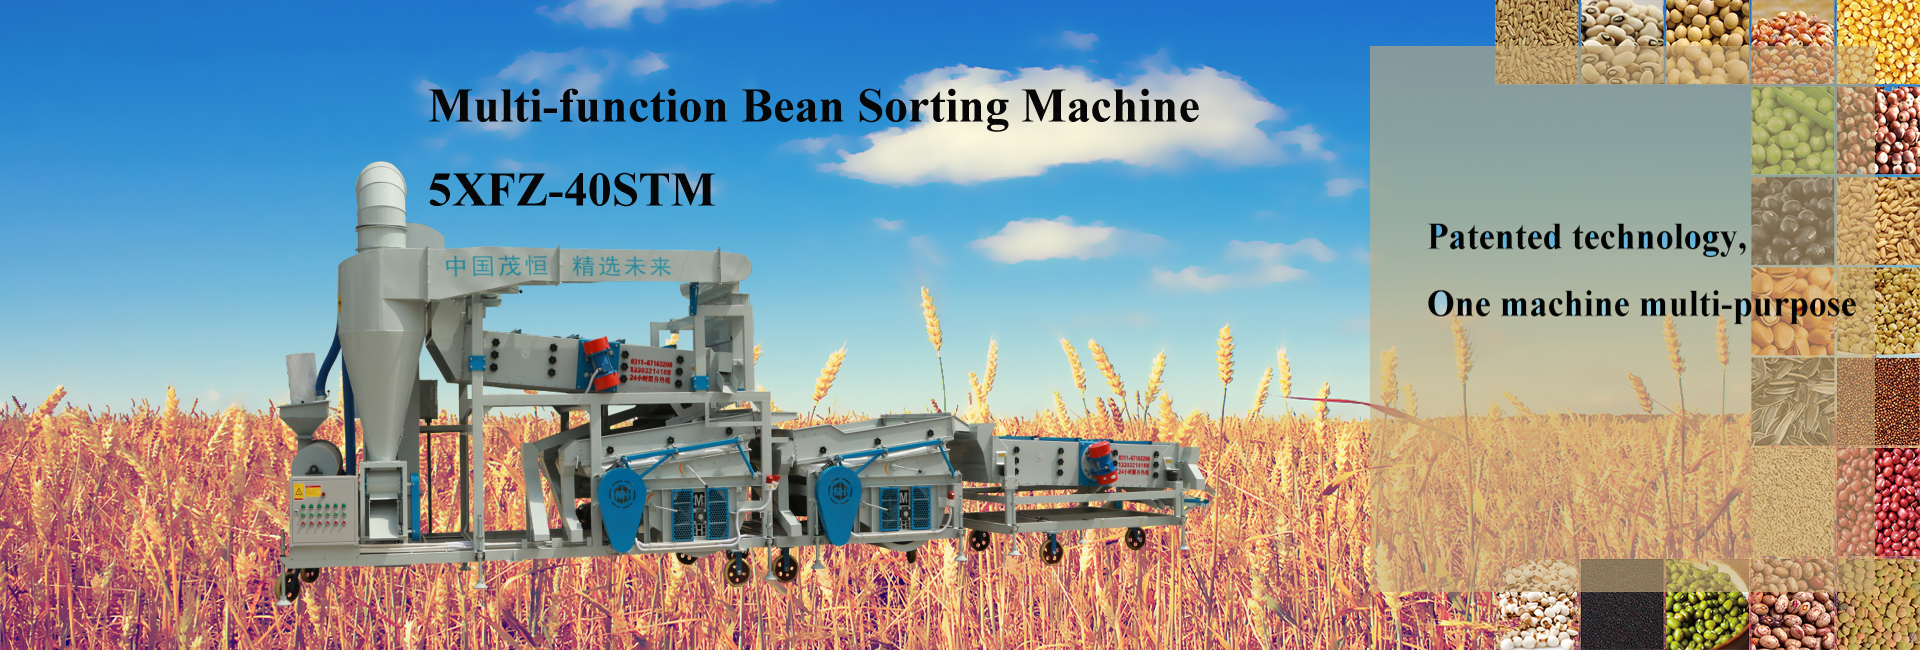 wheat huller machine
sugar beans processing machine
seed processing equipment manufacturers
seed cleaning plant
indent grain cleaner
grain gravity separator
seed cleaner and grader
grain cleaners manufacturers
multi grain destoner machine
seed separator machine manufacturers
seed cleaner China